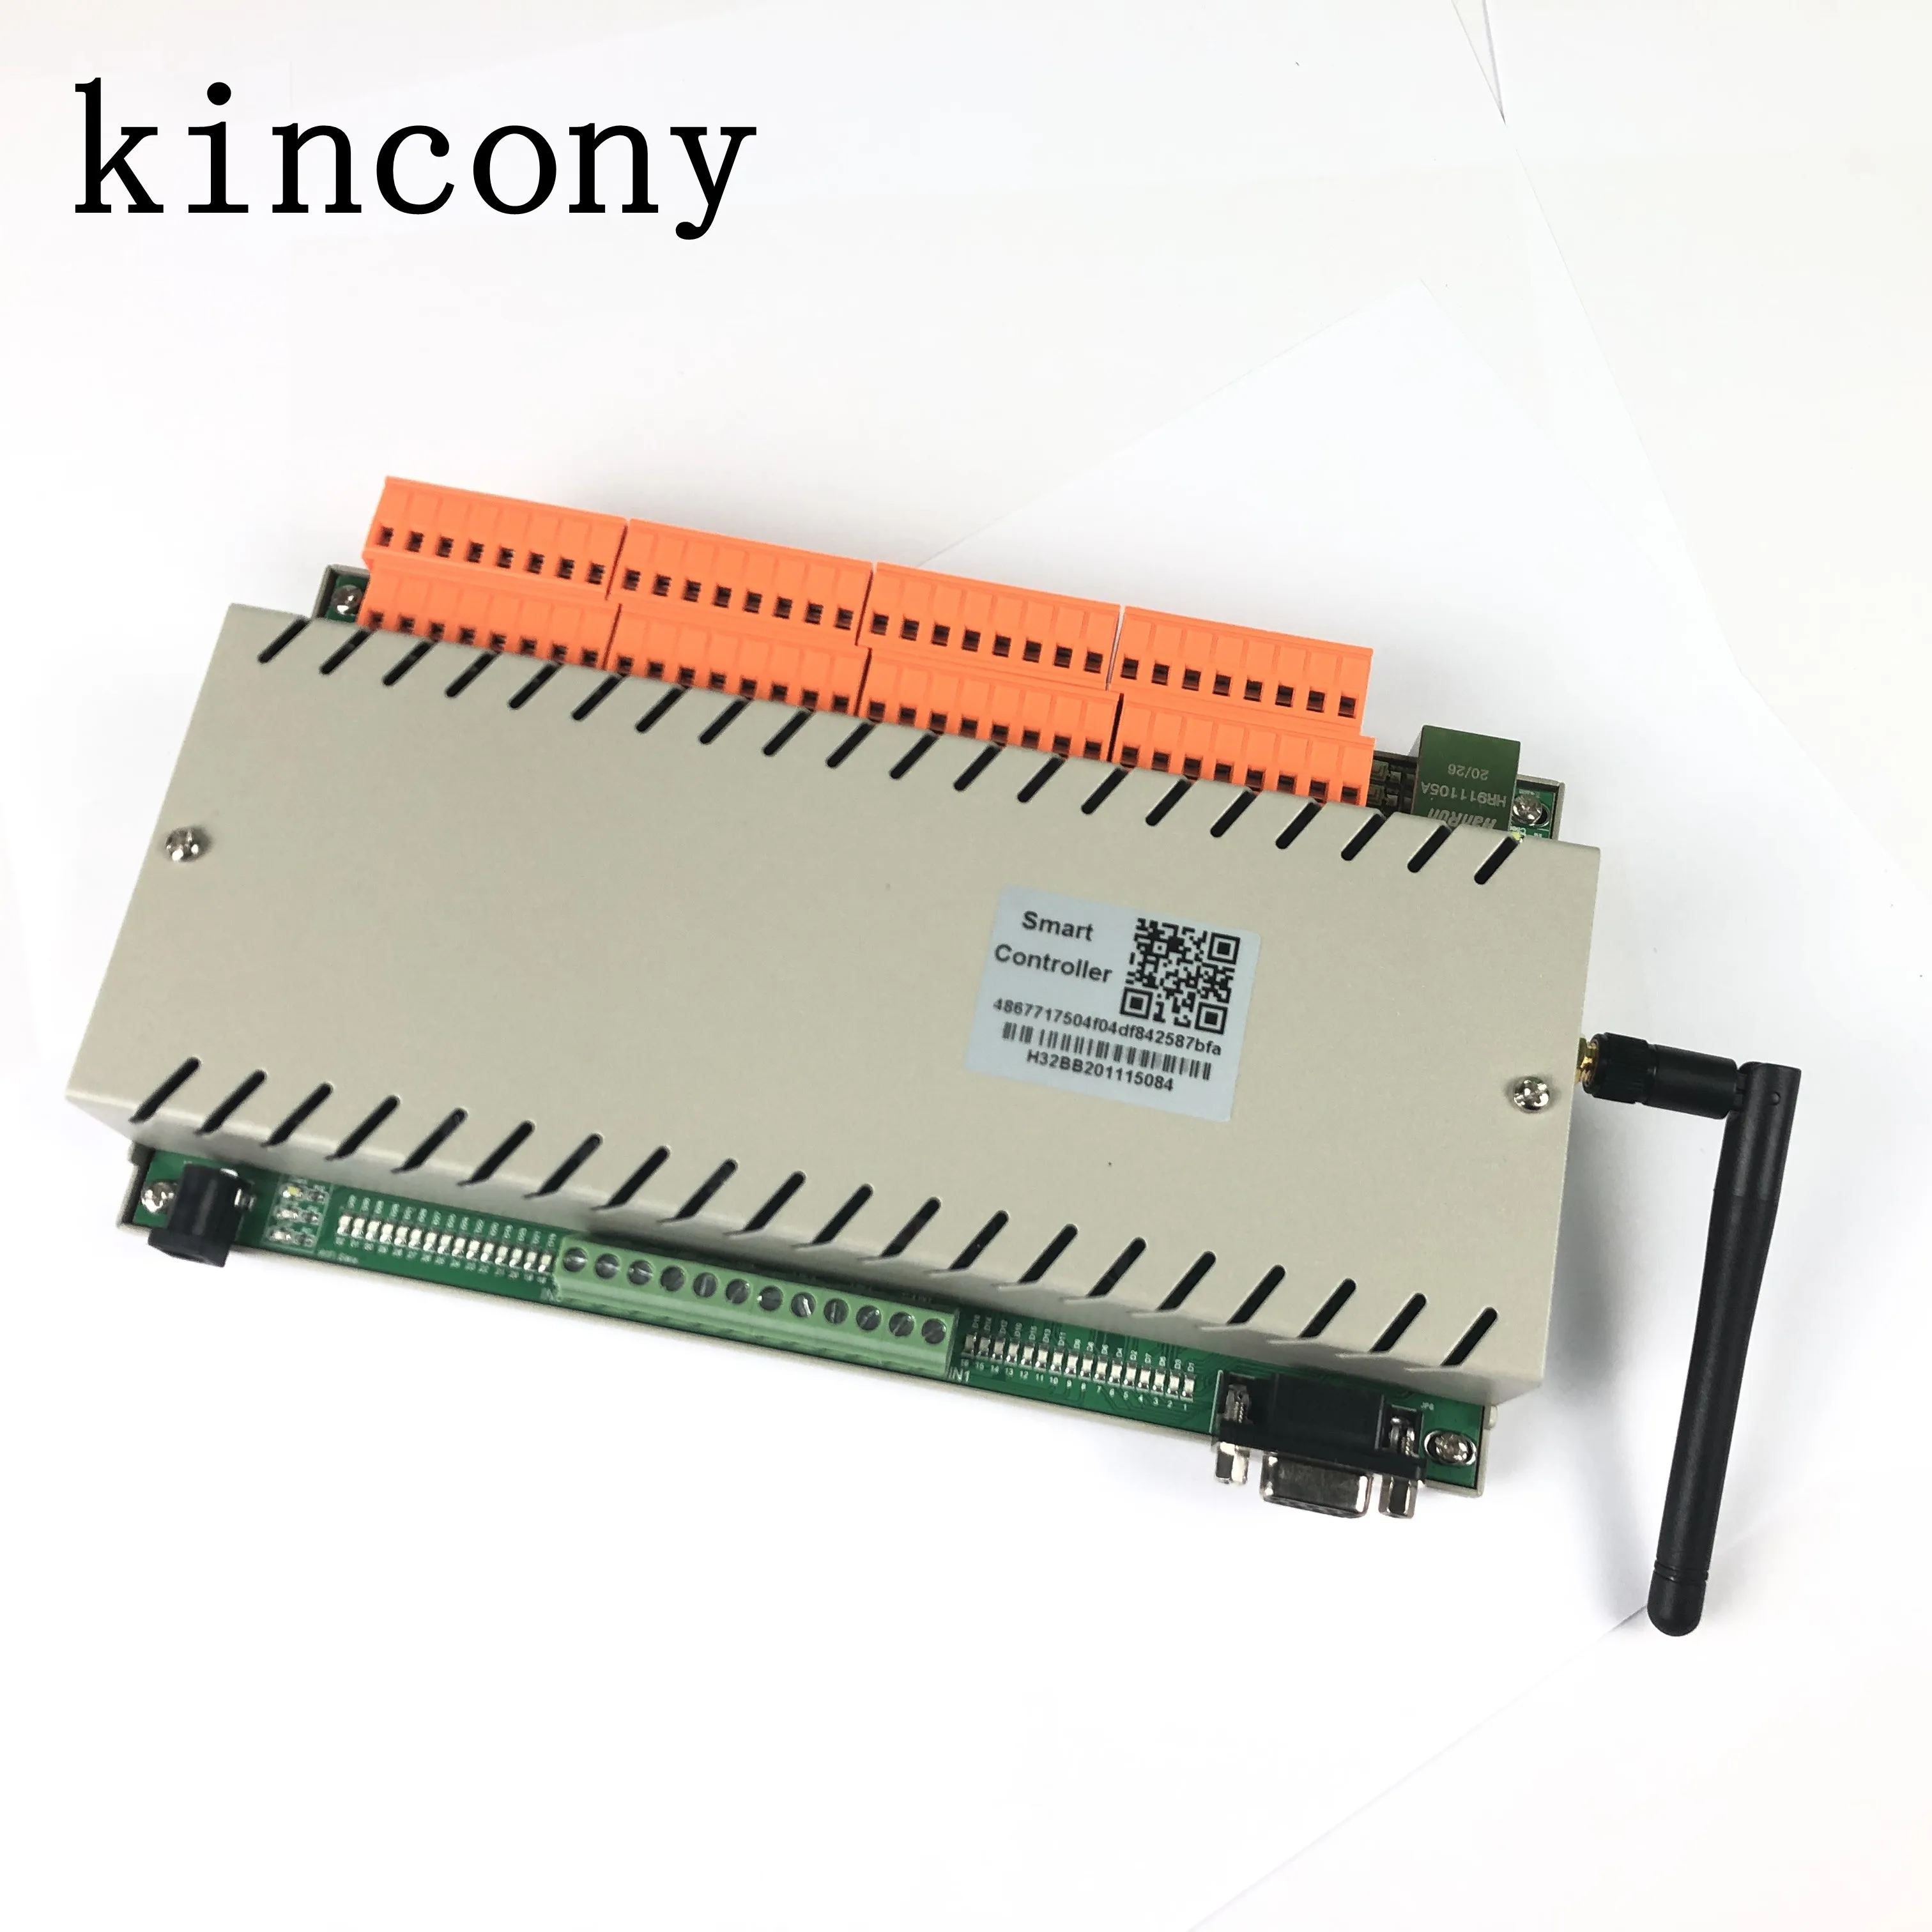 

kincony kc868 wifi/Ethernet light switch with Alexa voice controltroller Domotica